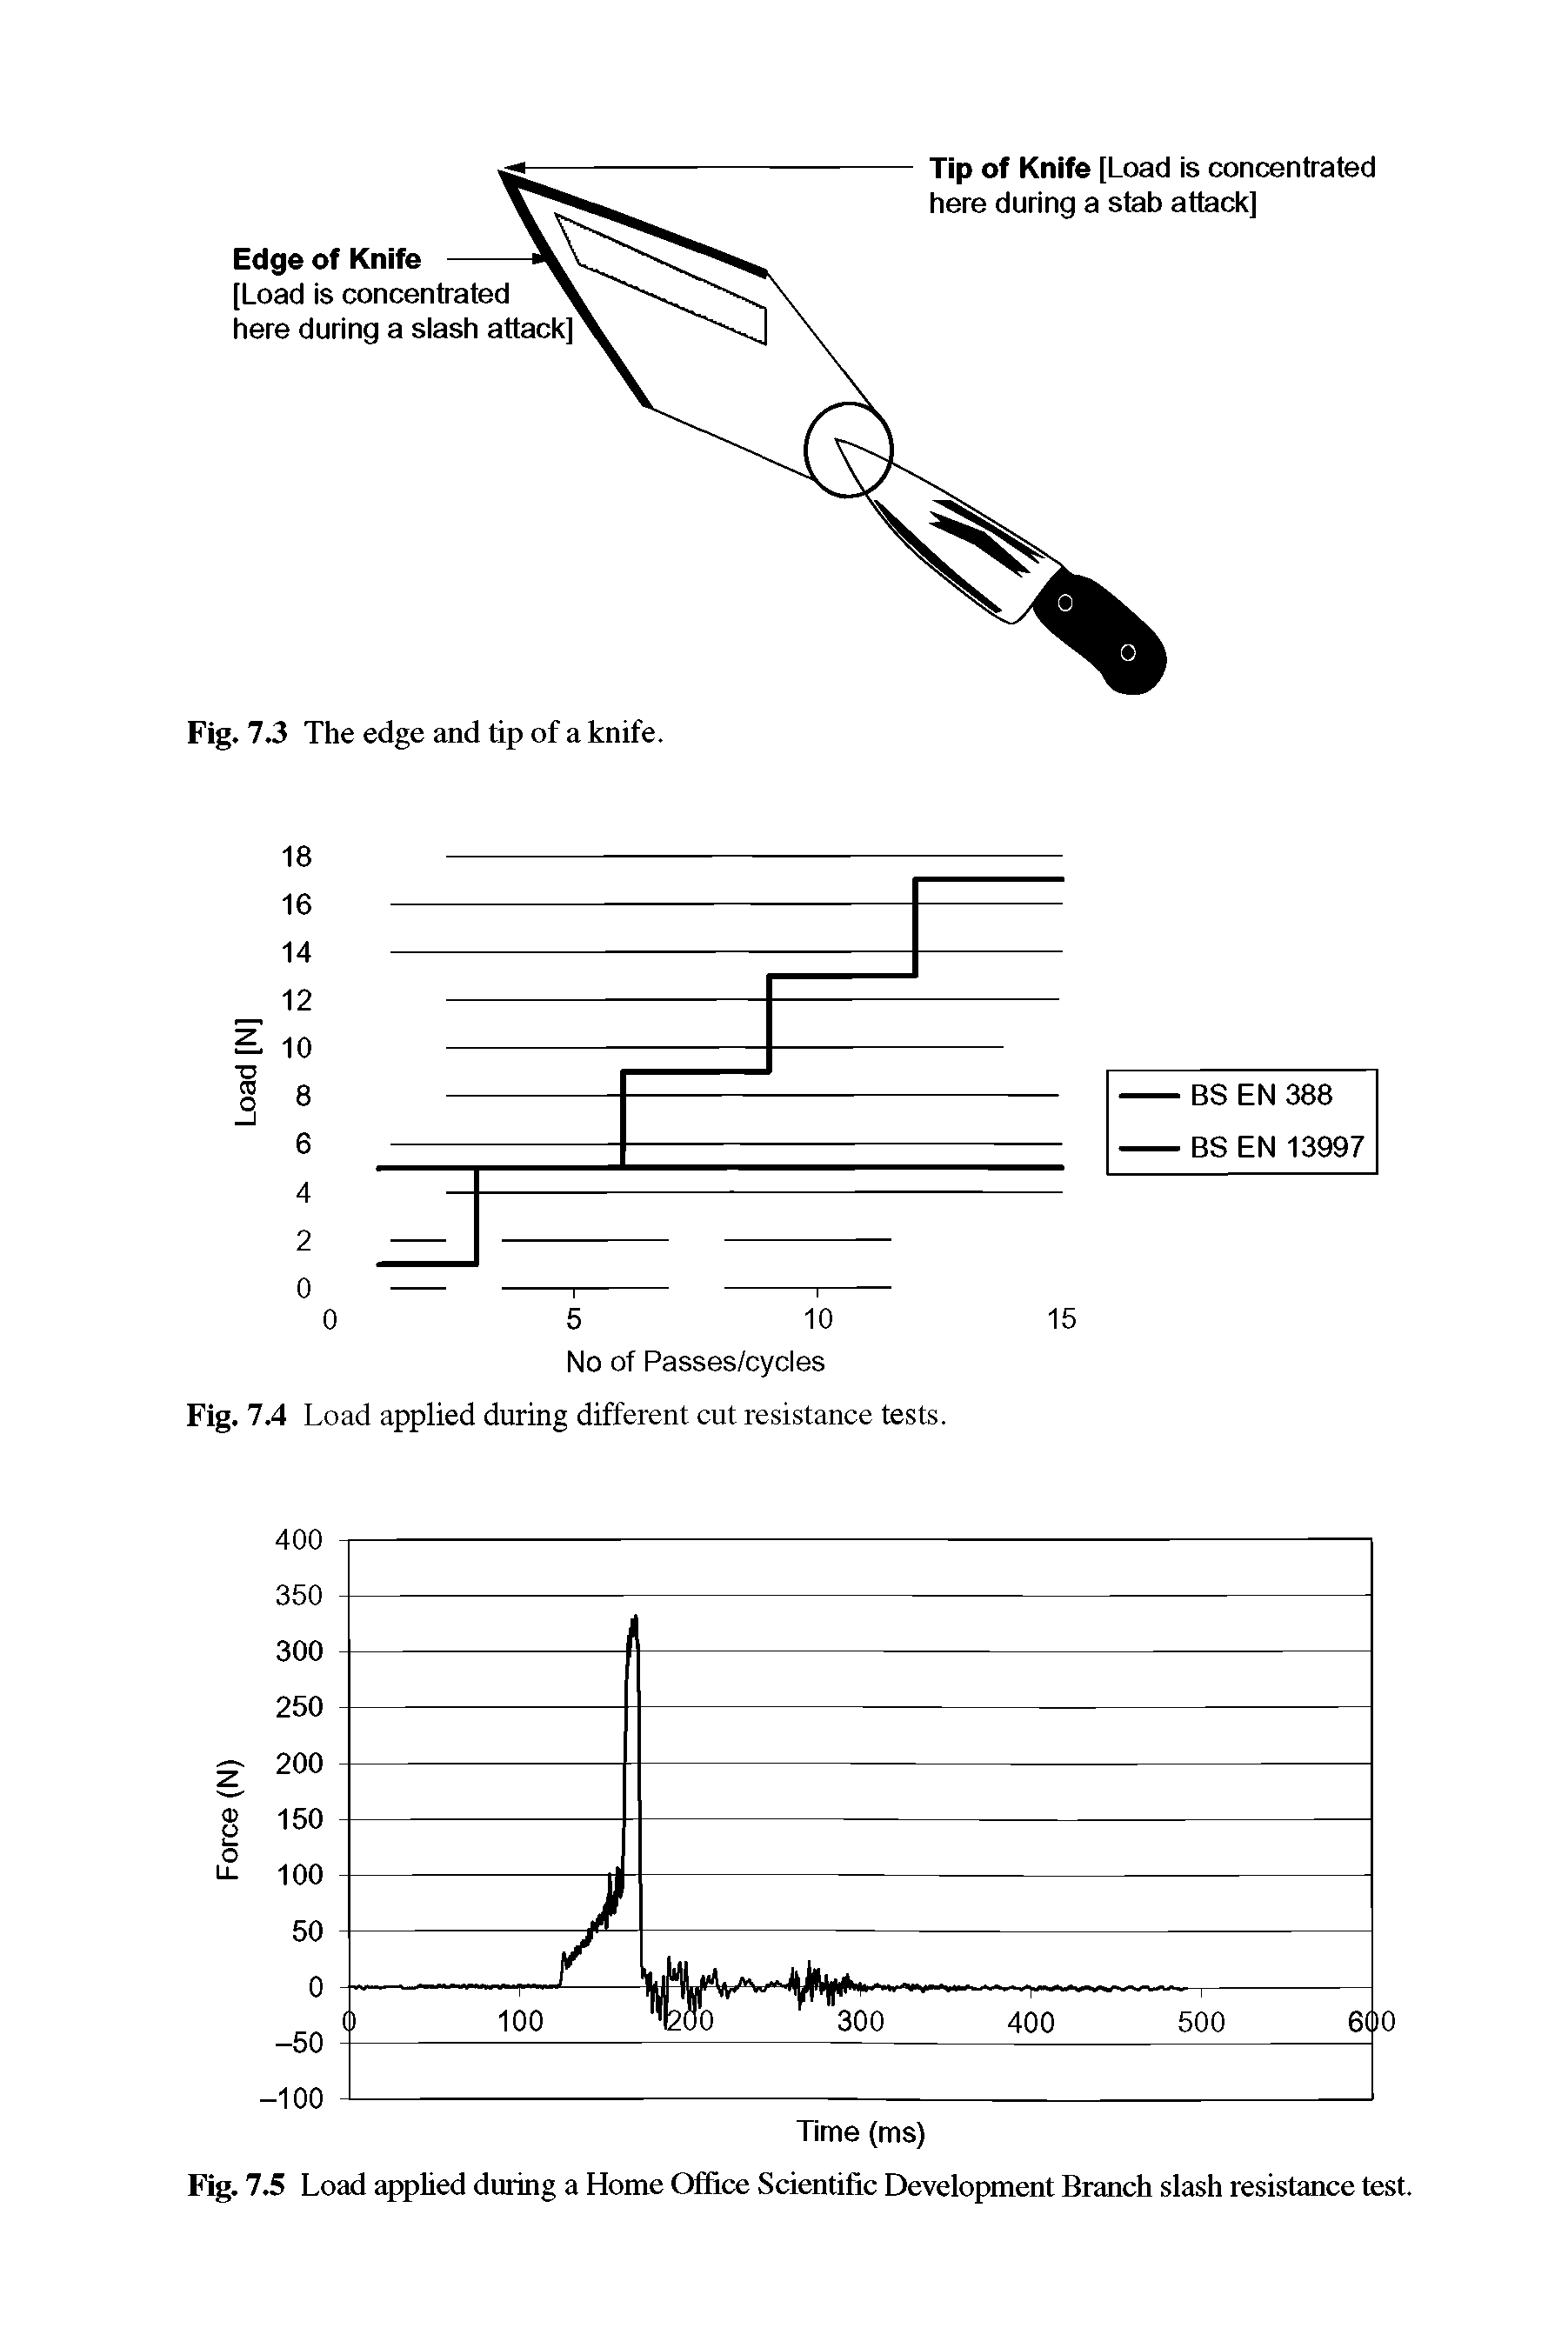 Fig. 7.4 Load applied during different cut resistance tests.